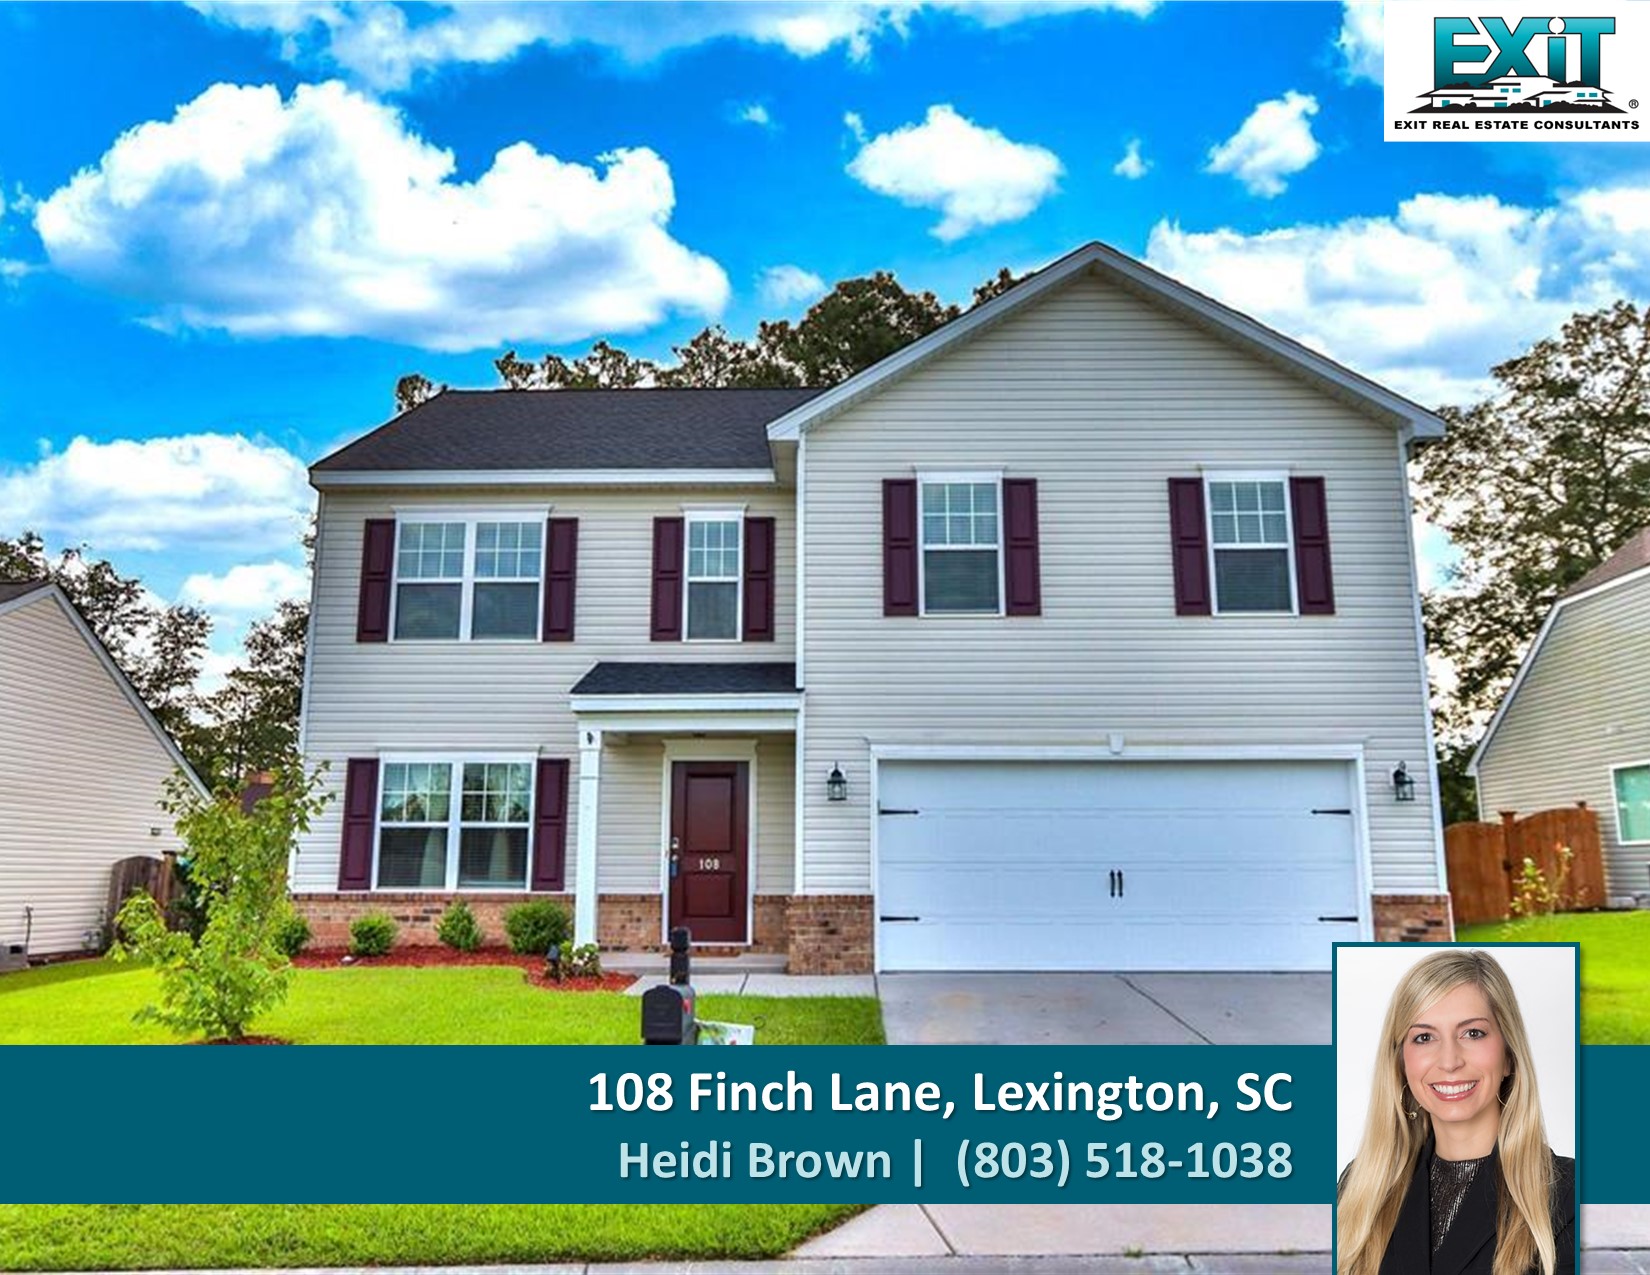 Just listed in the Estates of Persimmon Hill